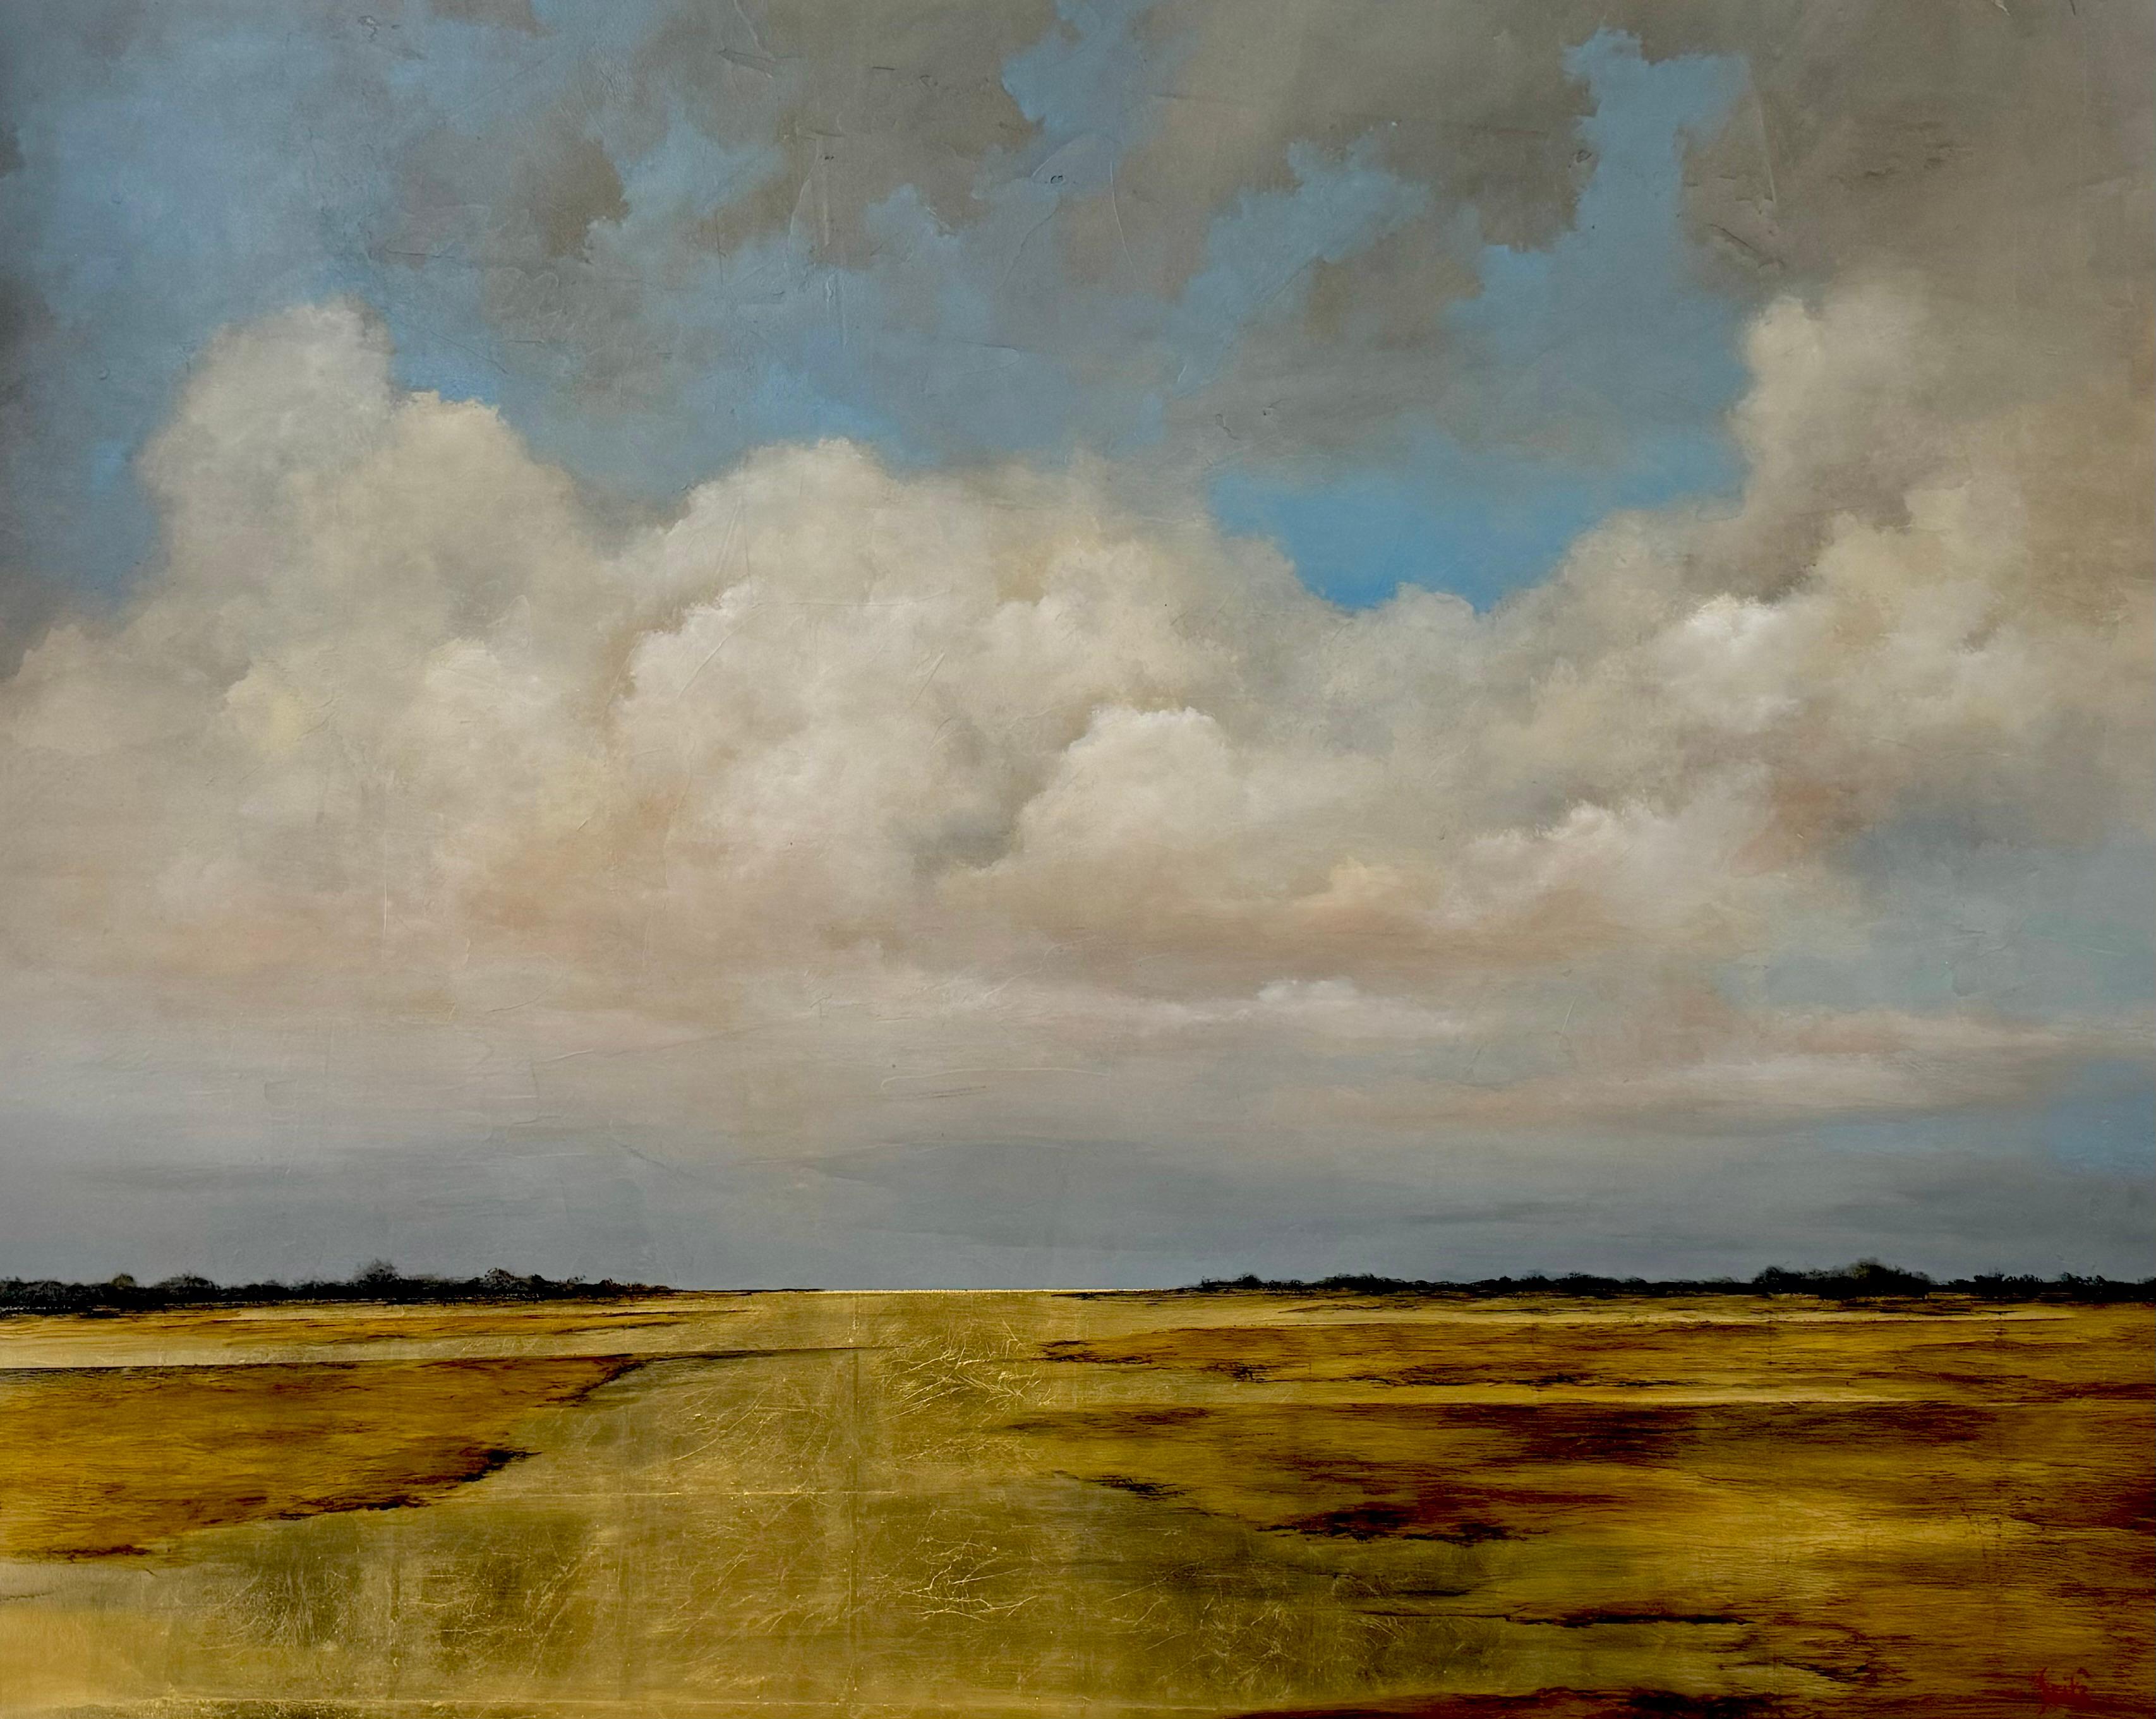 From Here to There by Jim Seitz, Horizontal Landscape Painting with Gold Leaf